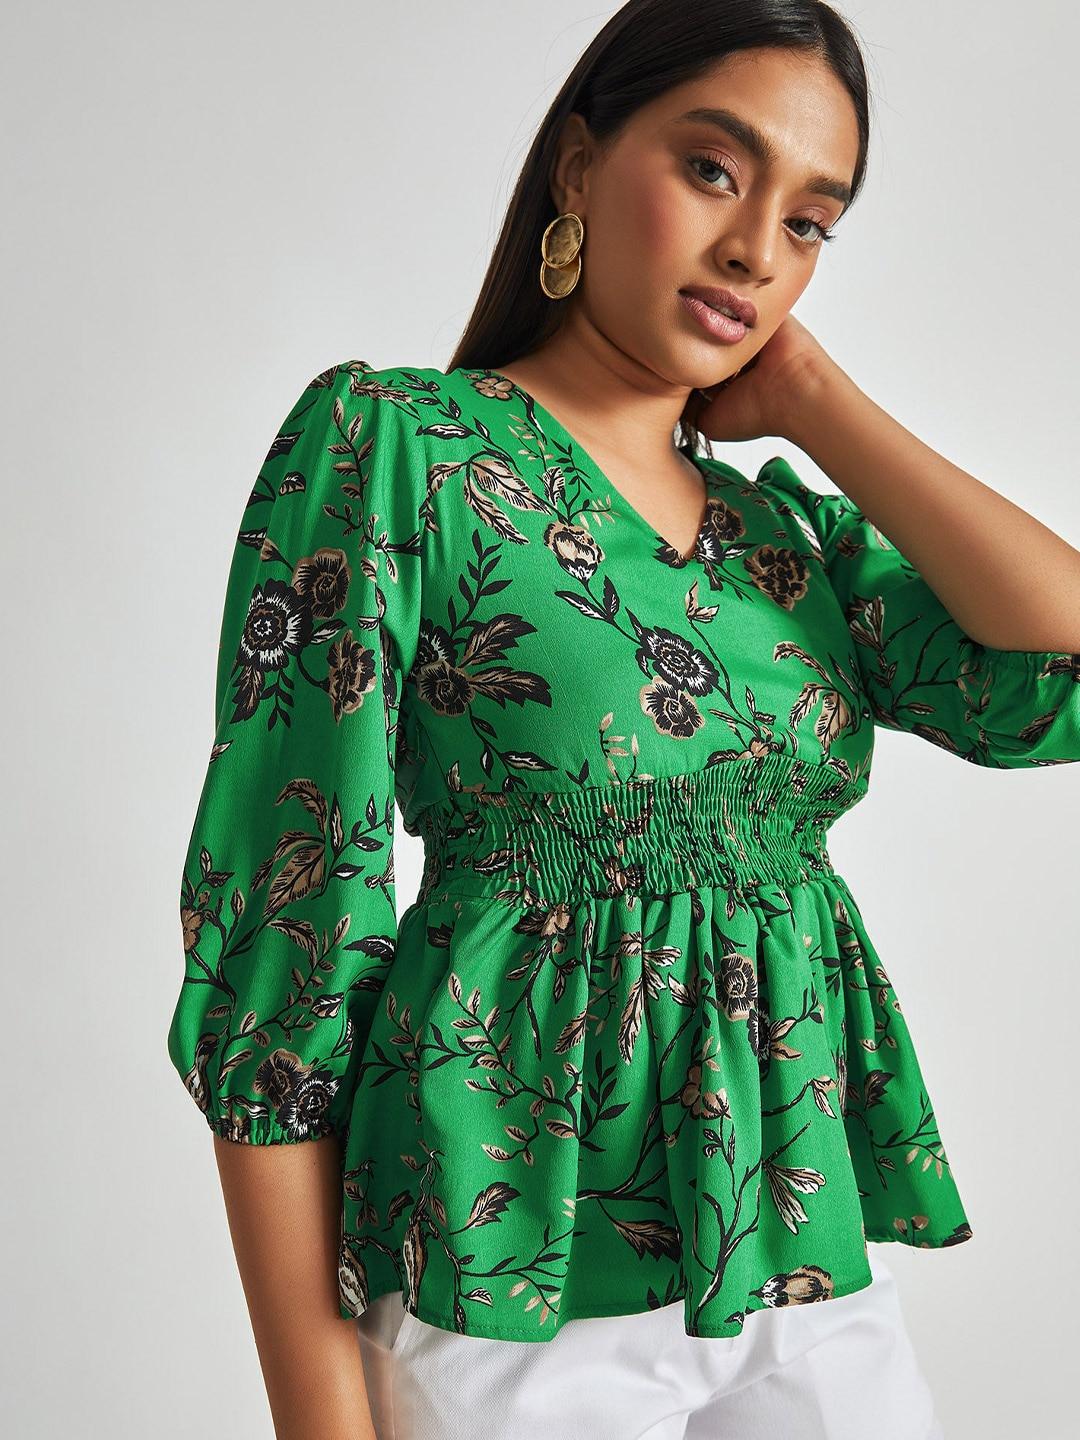 the-label-life-emerald-green-floral-peplum-top